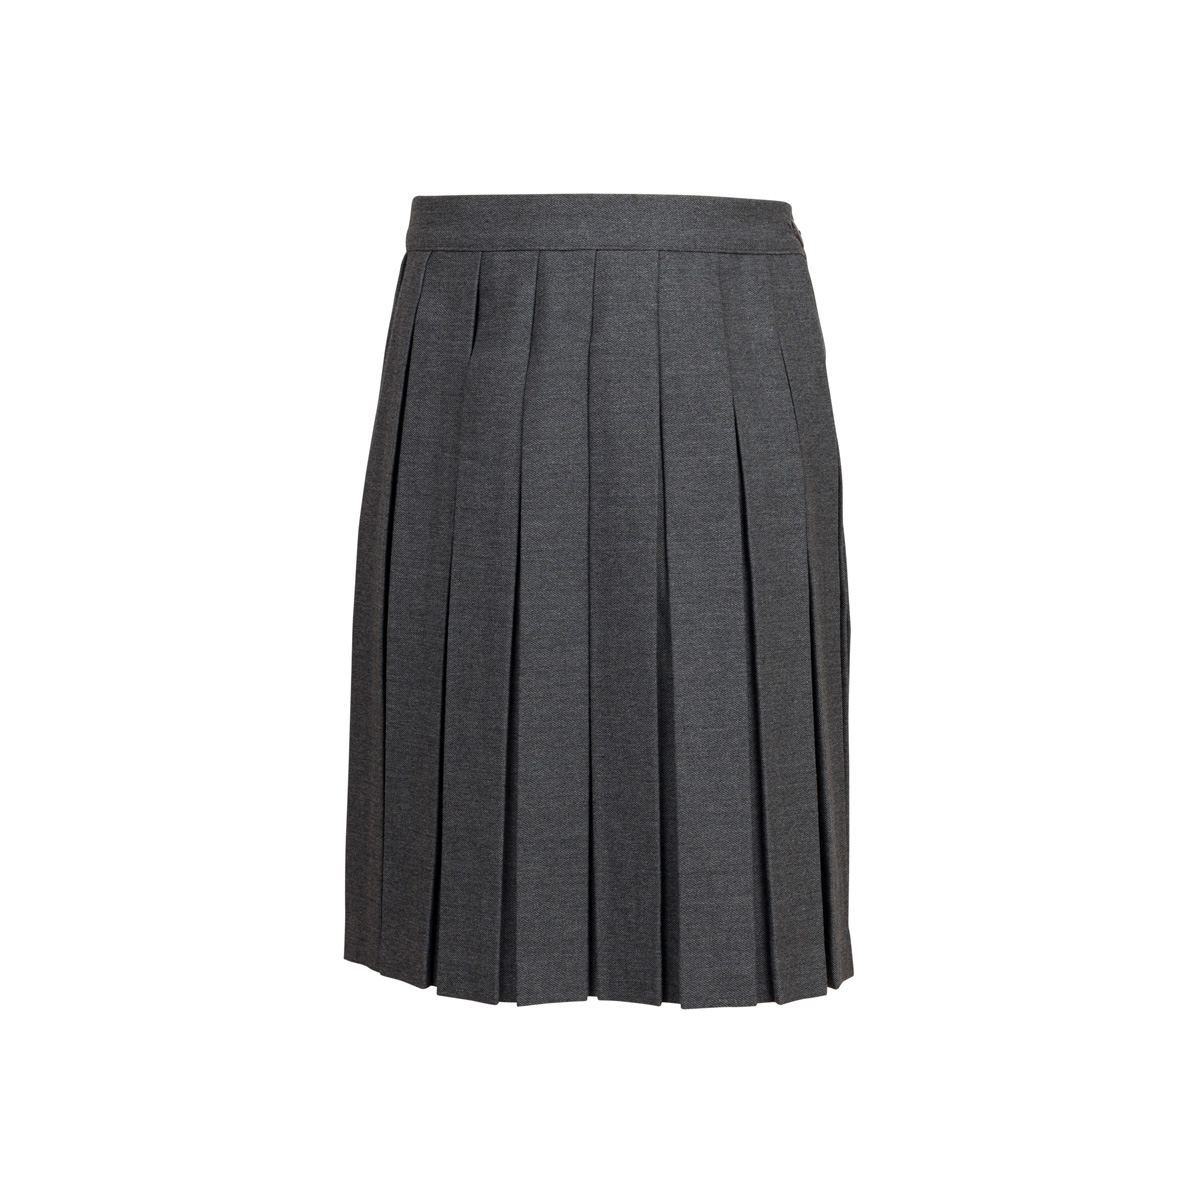 Skirt Girls - All Around Pleats - Grey - The Back to School Store